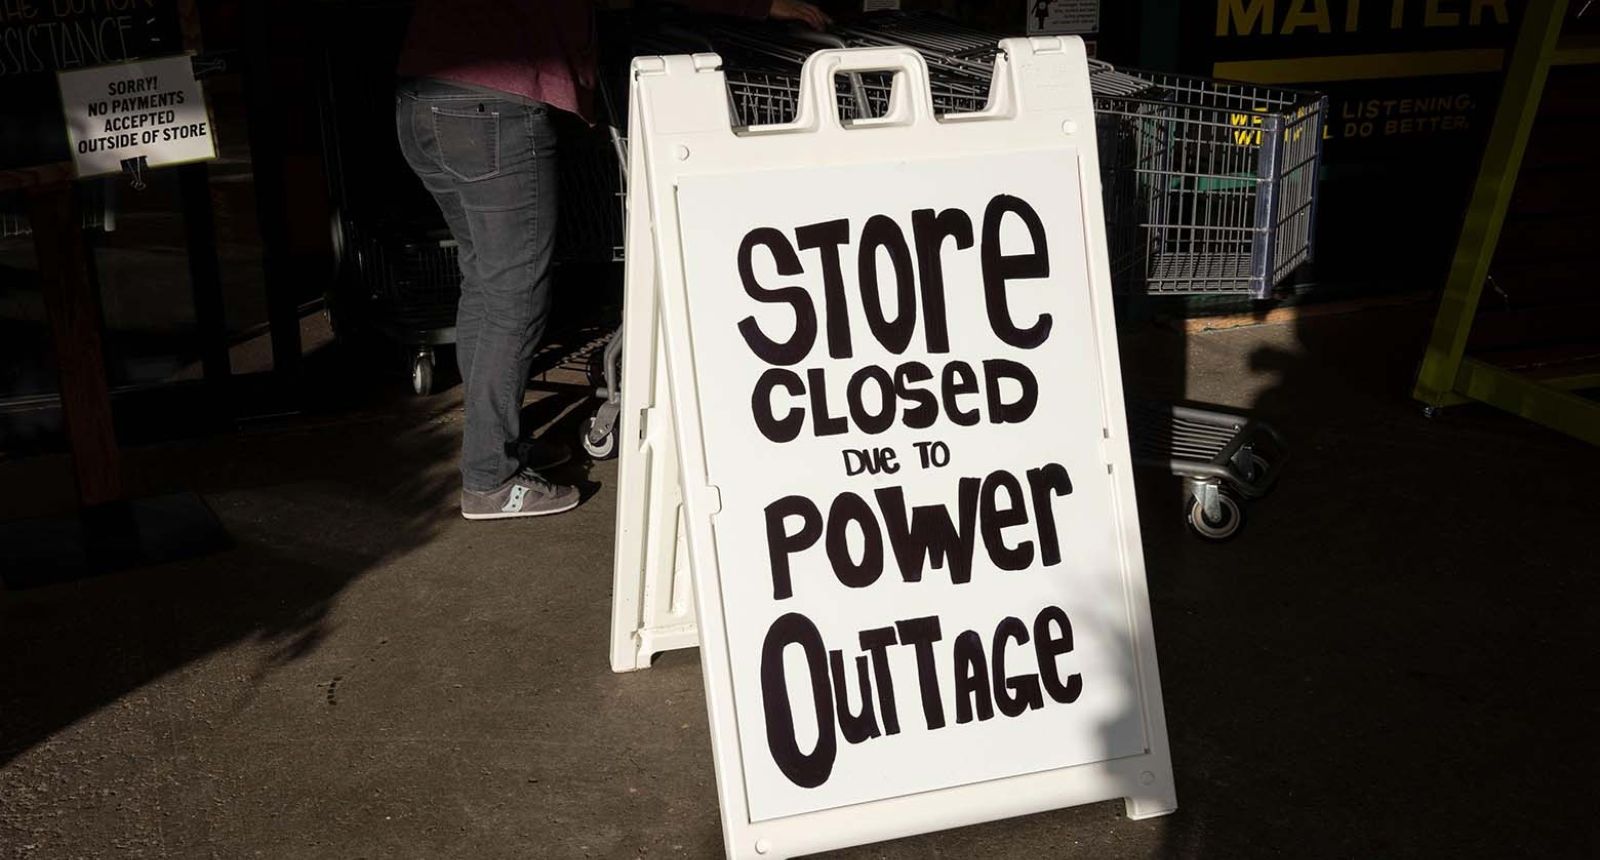 Many businesses in South Africa have had to drastically curb opening hours due to blackouts.